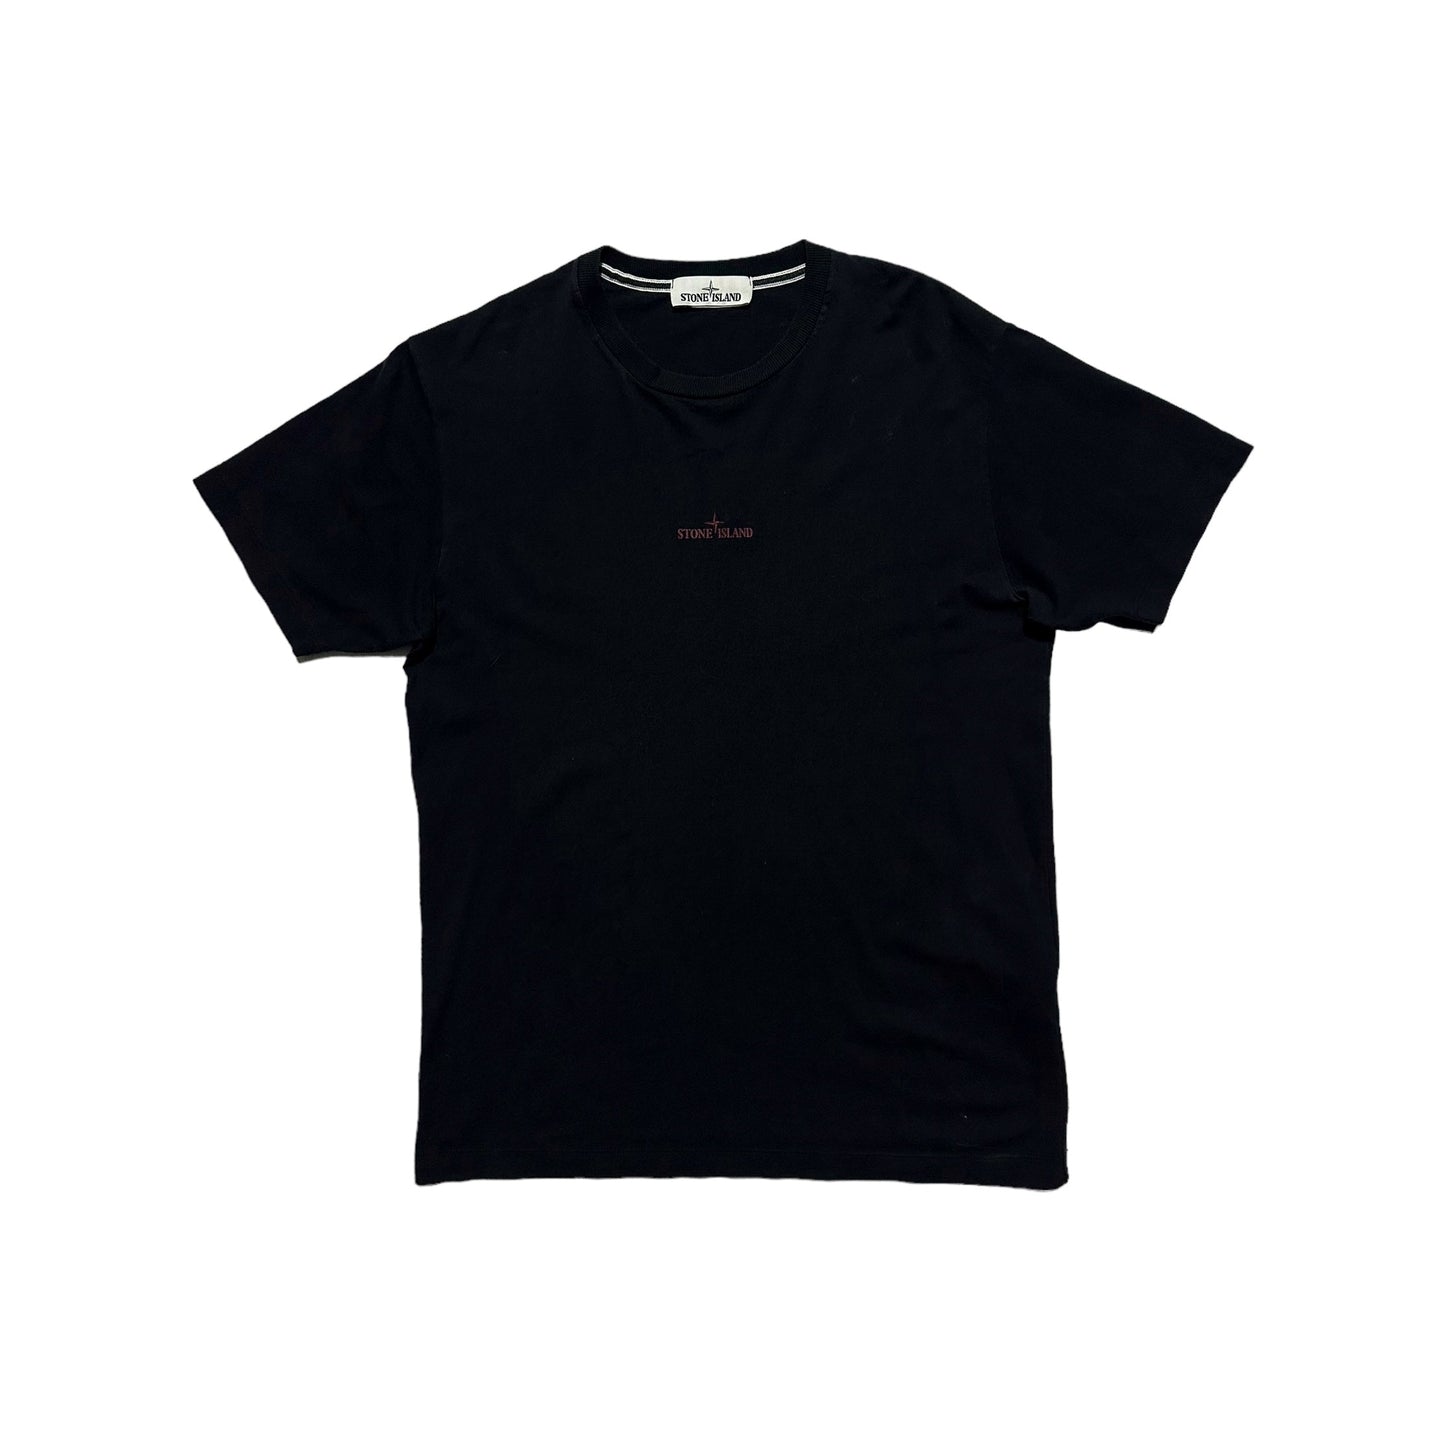 Stone Island Short Sleeved Spell Out Graphic T Shirt